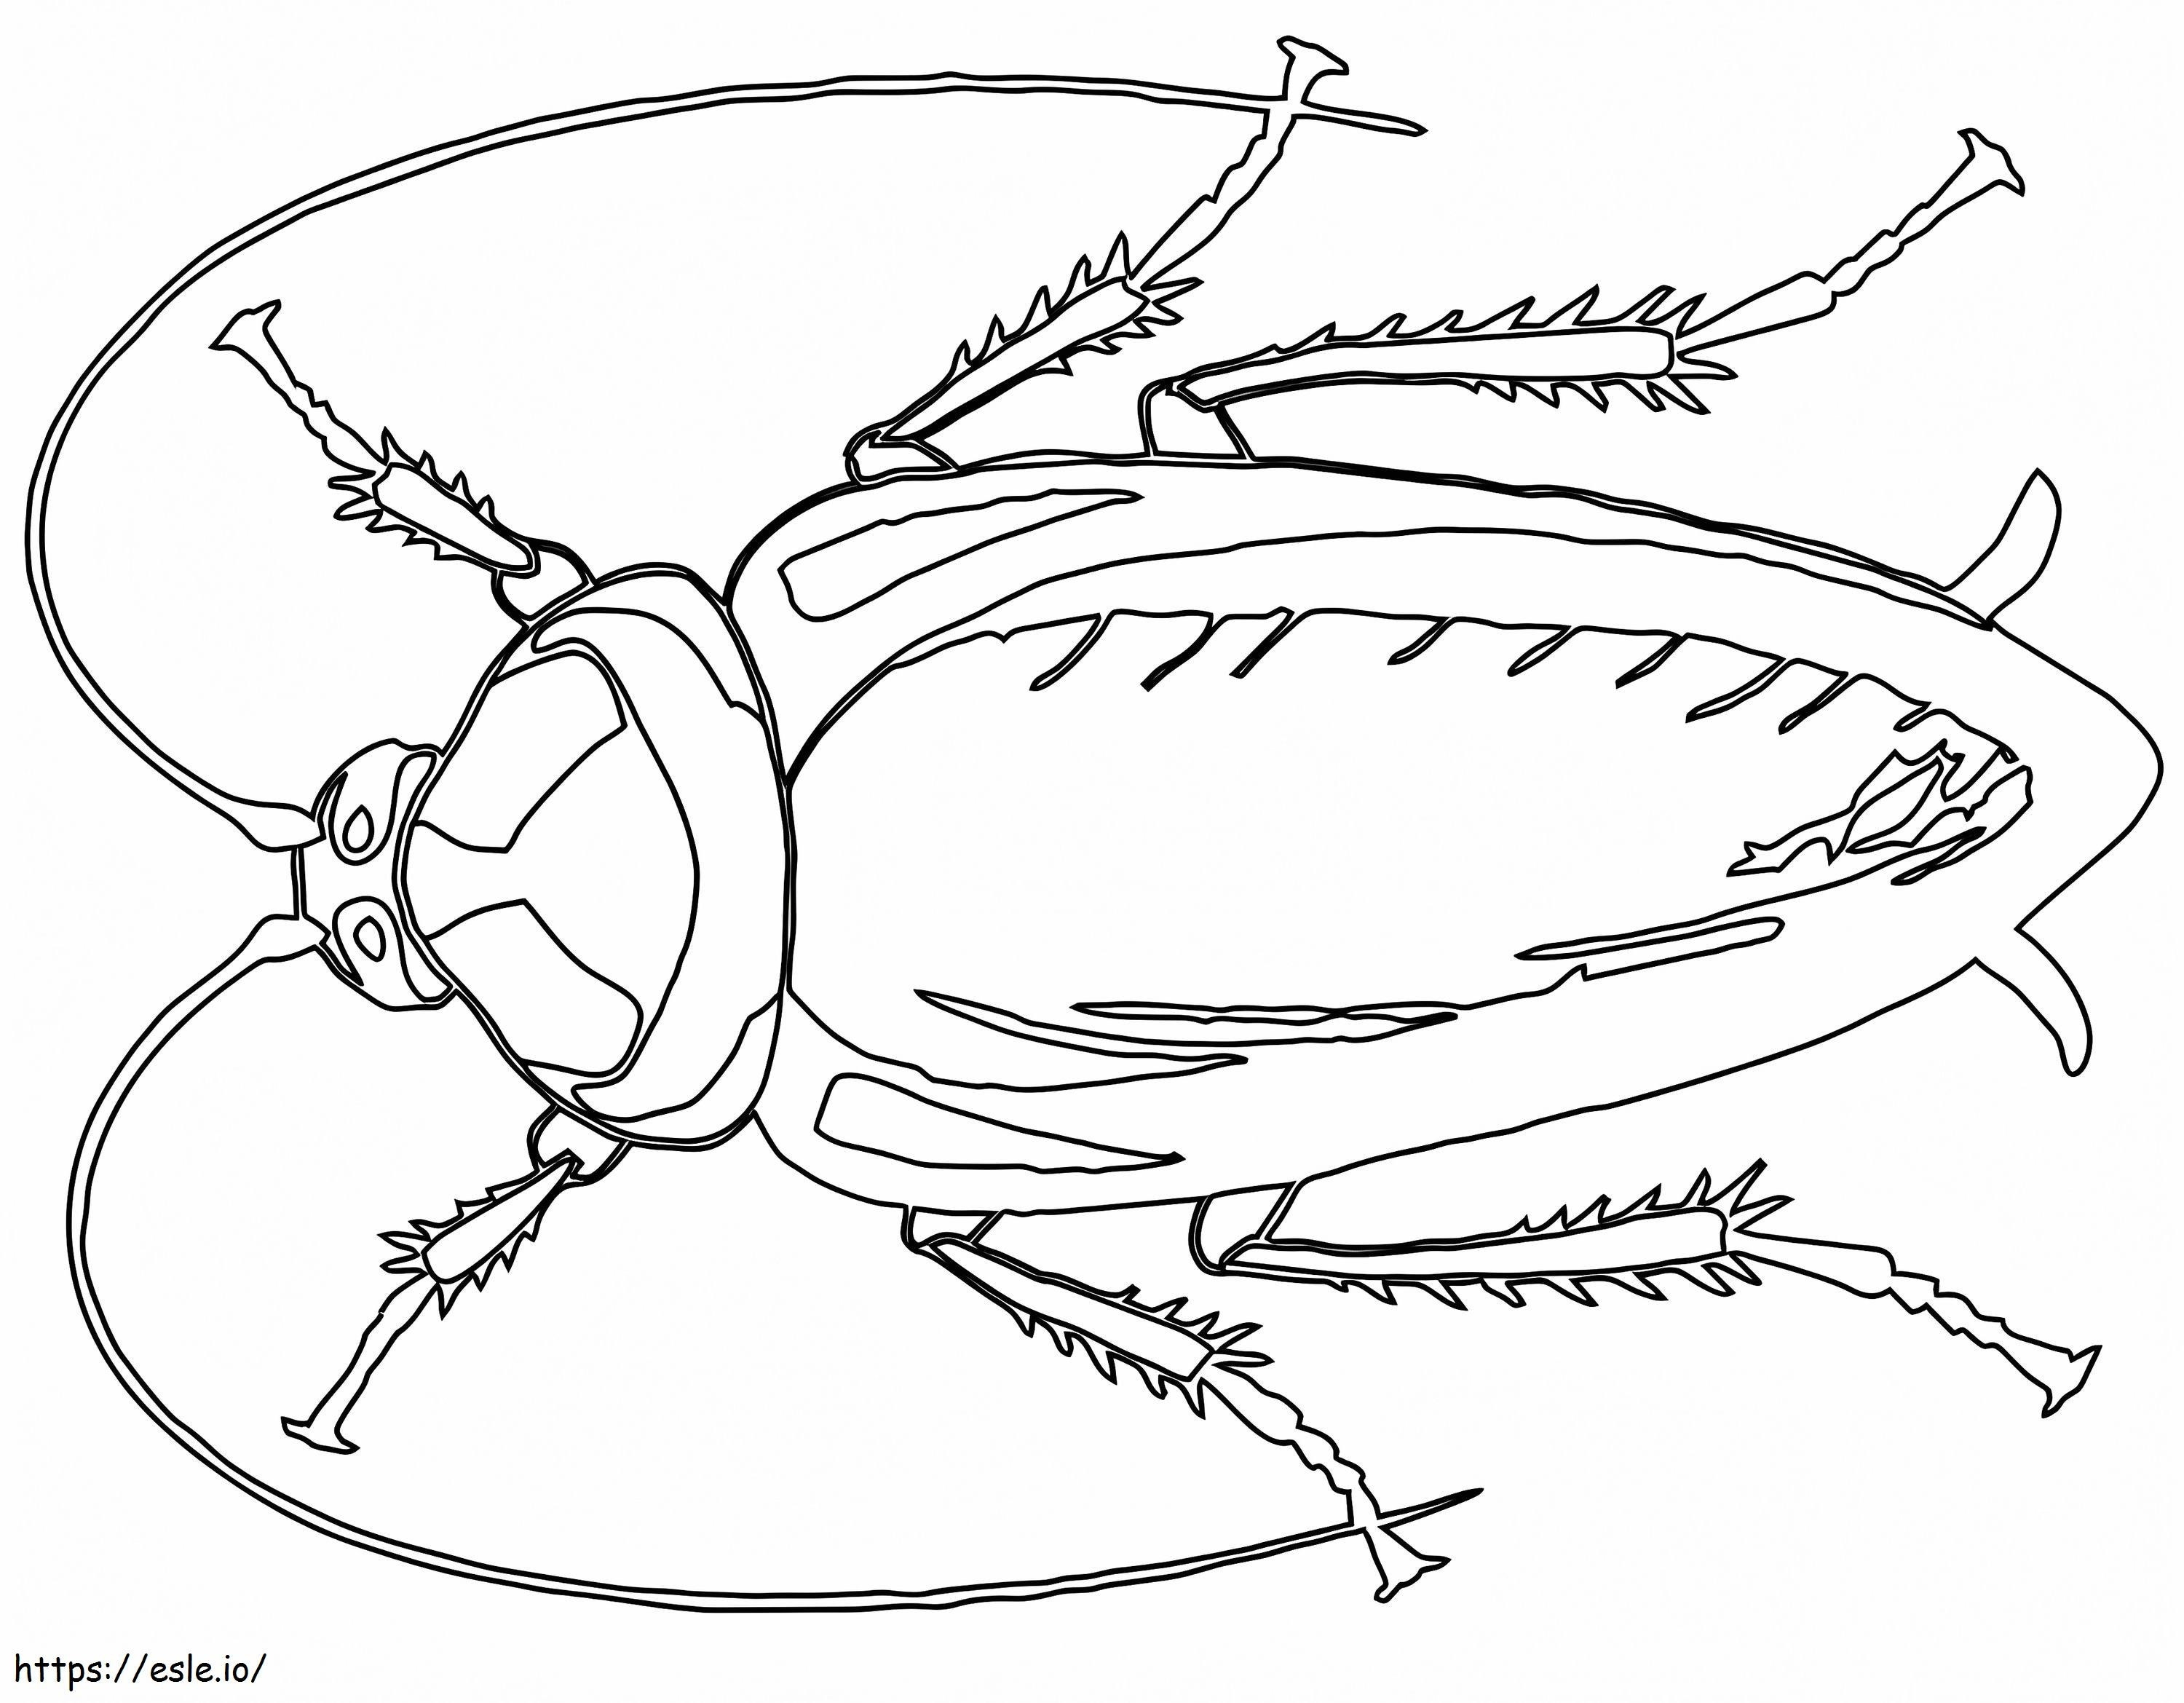 Cockroach Printable coloring page